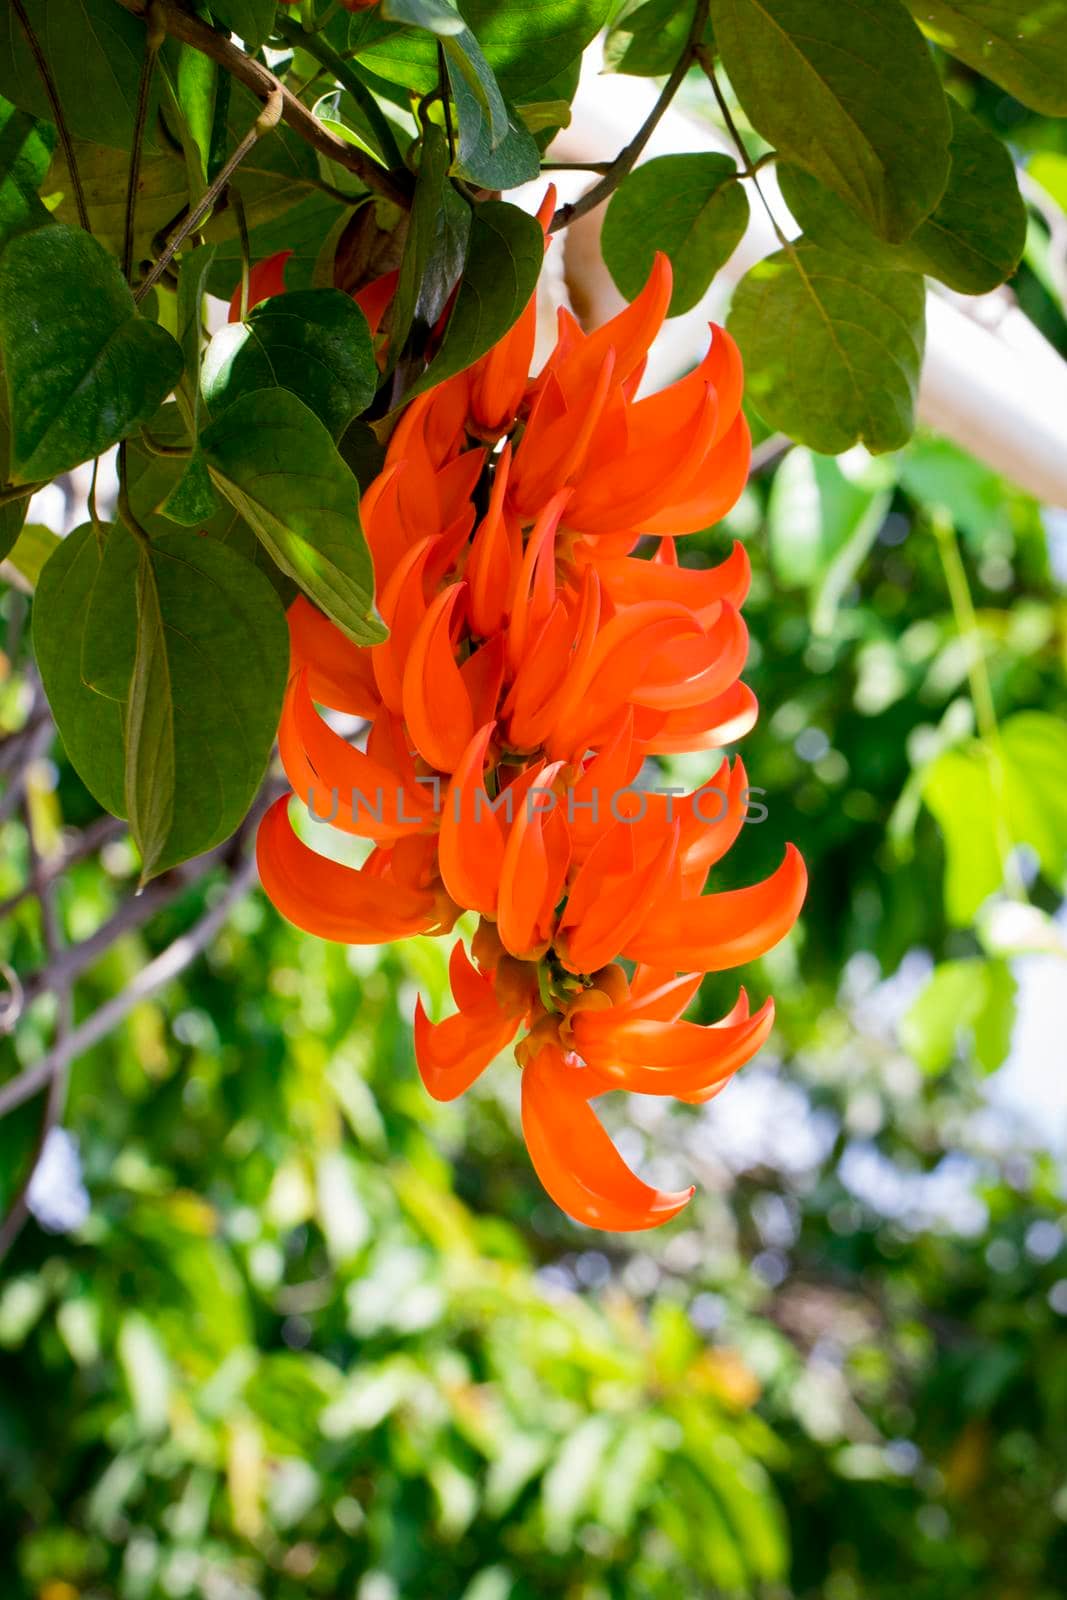 Flower of New Guinea creeper, Red Lade Vine in the garden by yod67